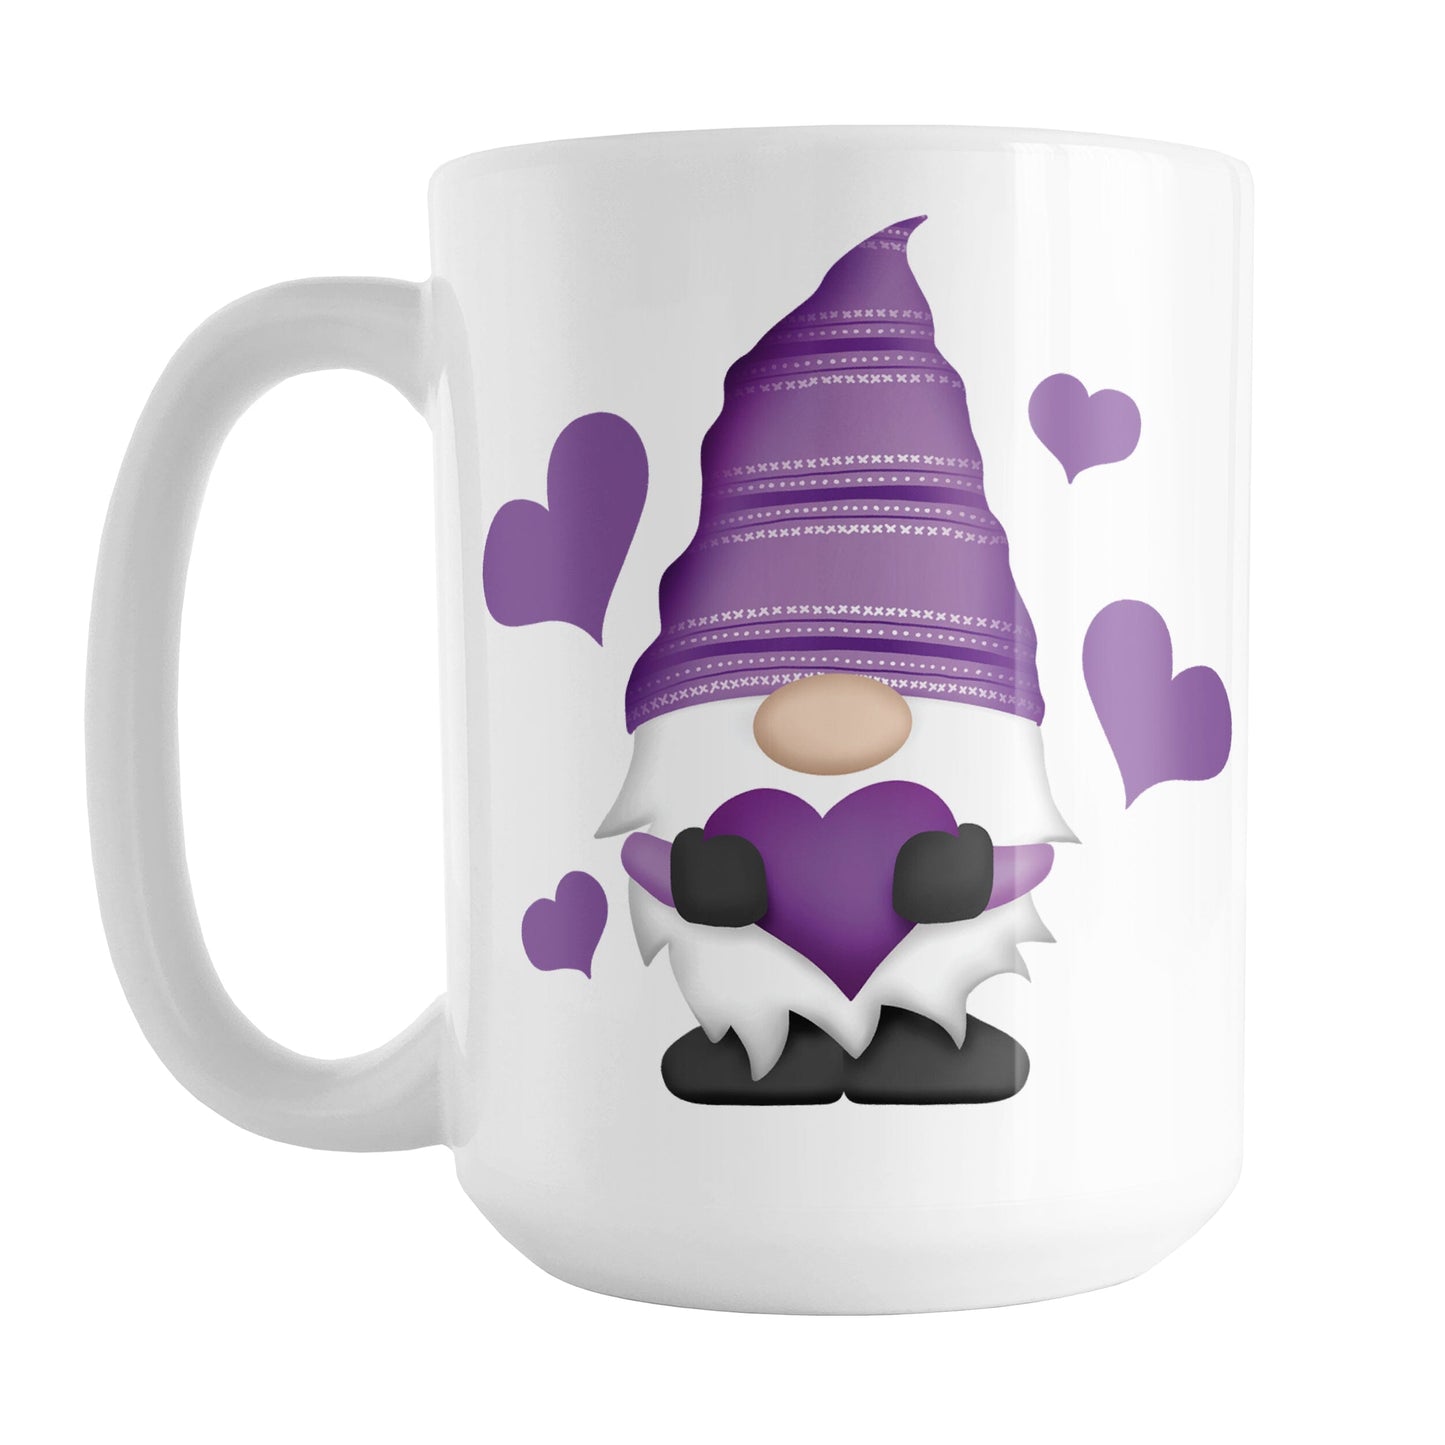 Purple Heart Gnome Mug (15oz) at Amy's Coffee Mugs. A ceramic coffee mug designed with an adorable gnome wearing a festive purple hat and holding a large purple heart with bold purple hearts around him. This loving gnome illustration is on both sides of the mug.